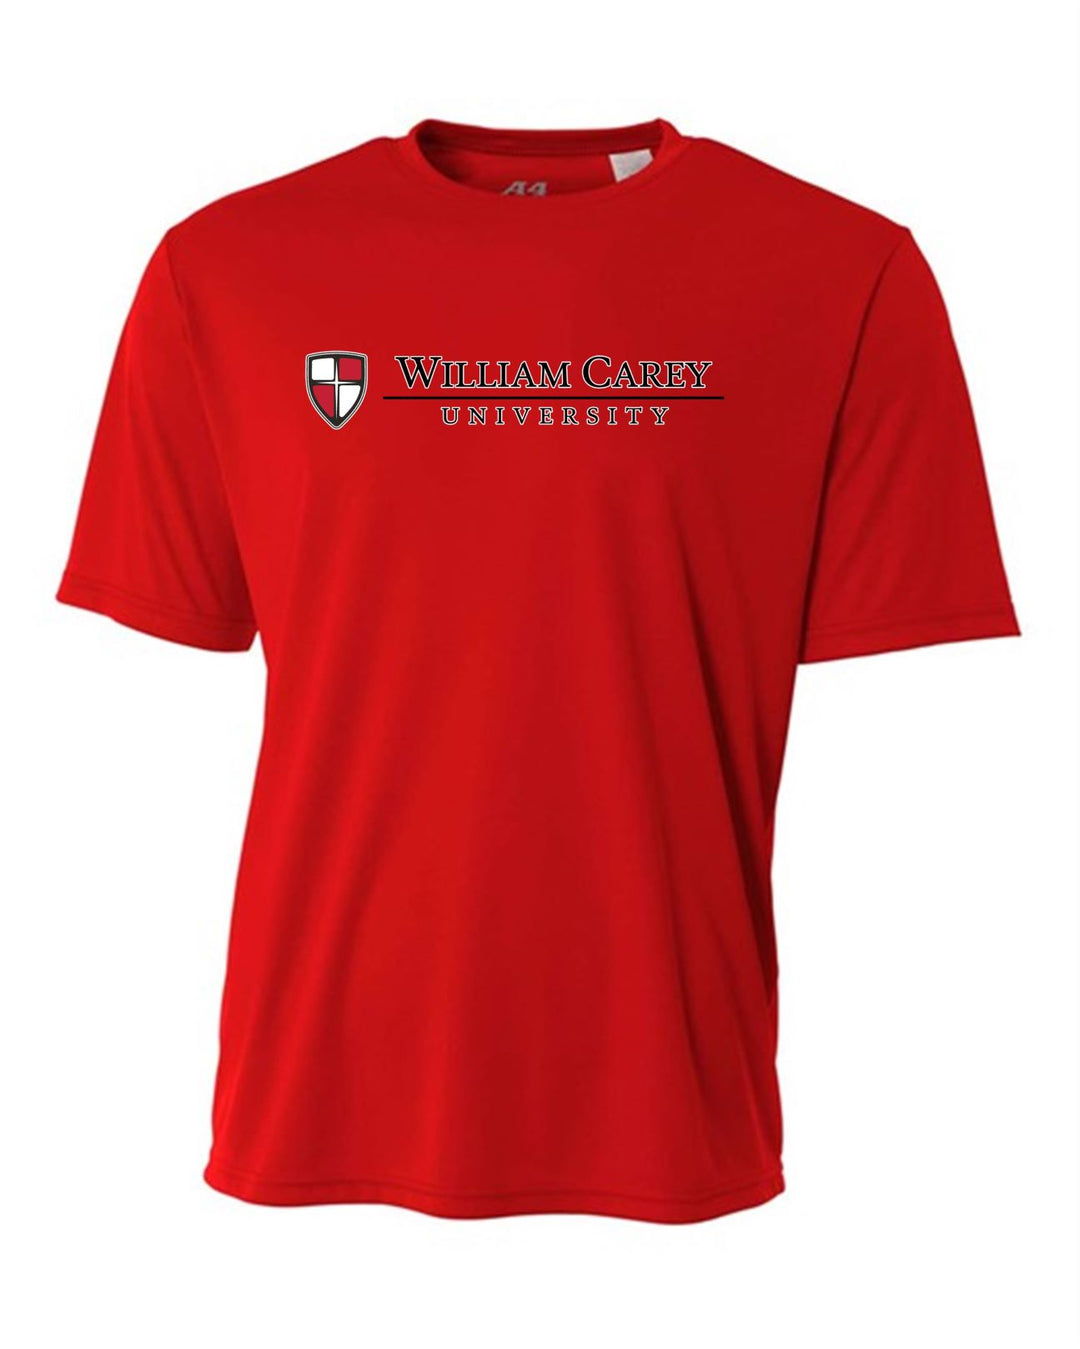 WCU College Of Osteopathic Medicine Men's Short-Sleeve Performance Shirt WCU OM Red Mens Small - Third Coast Soccer